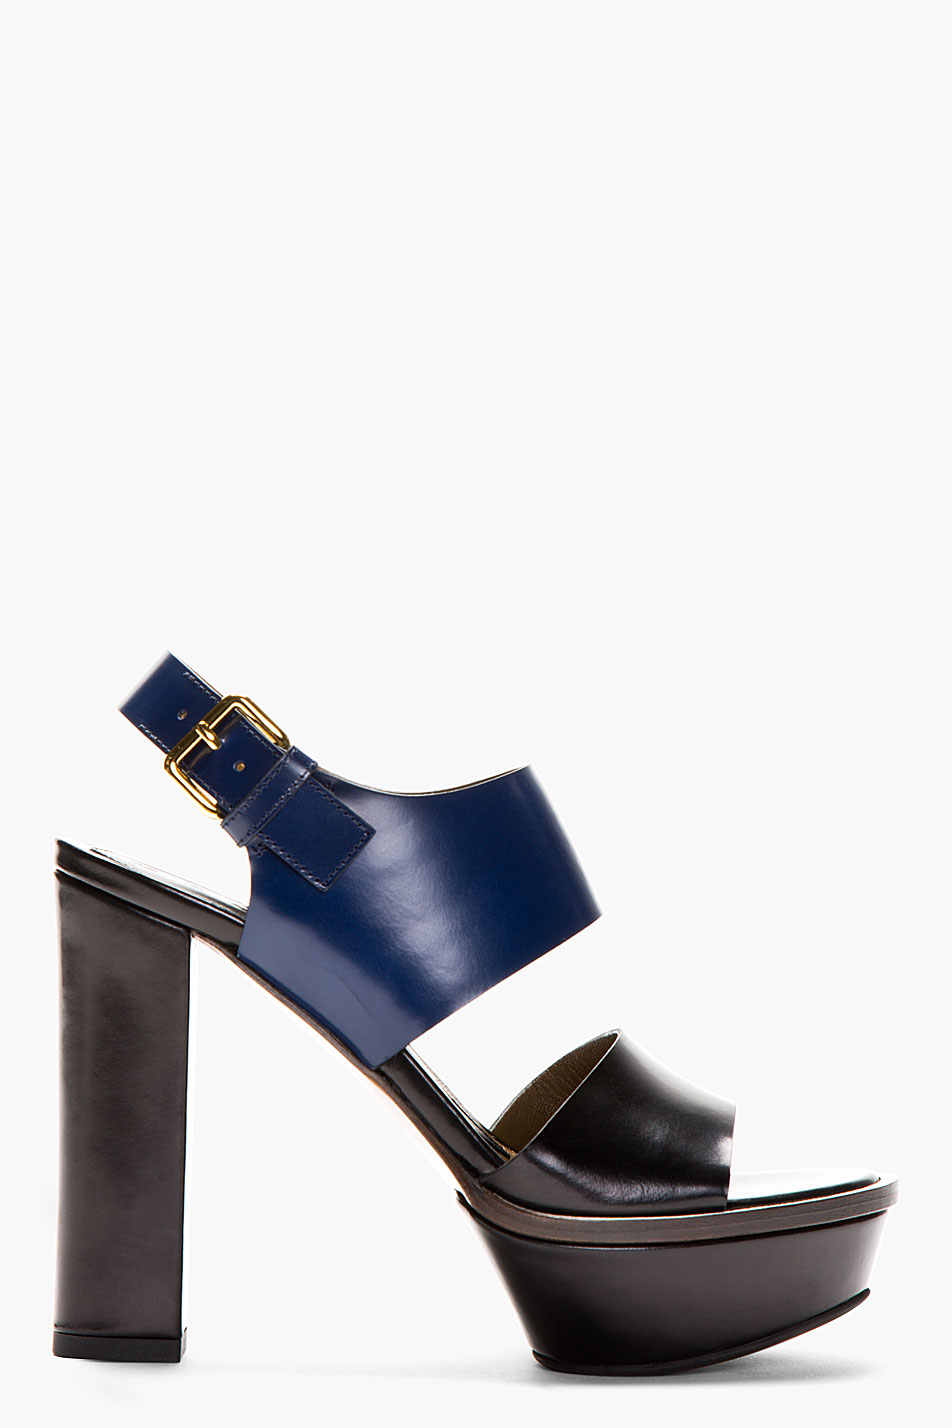 Lyst - Marni Navy and Black Leather Platform Heels in Blue